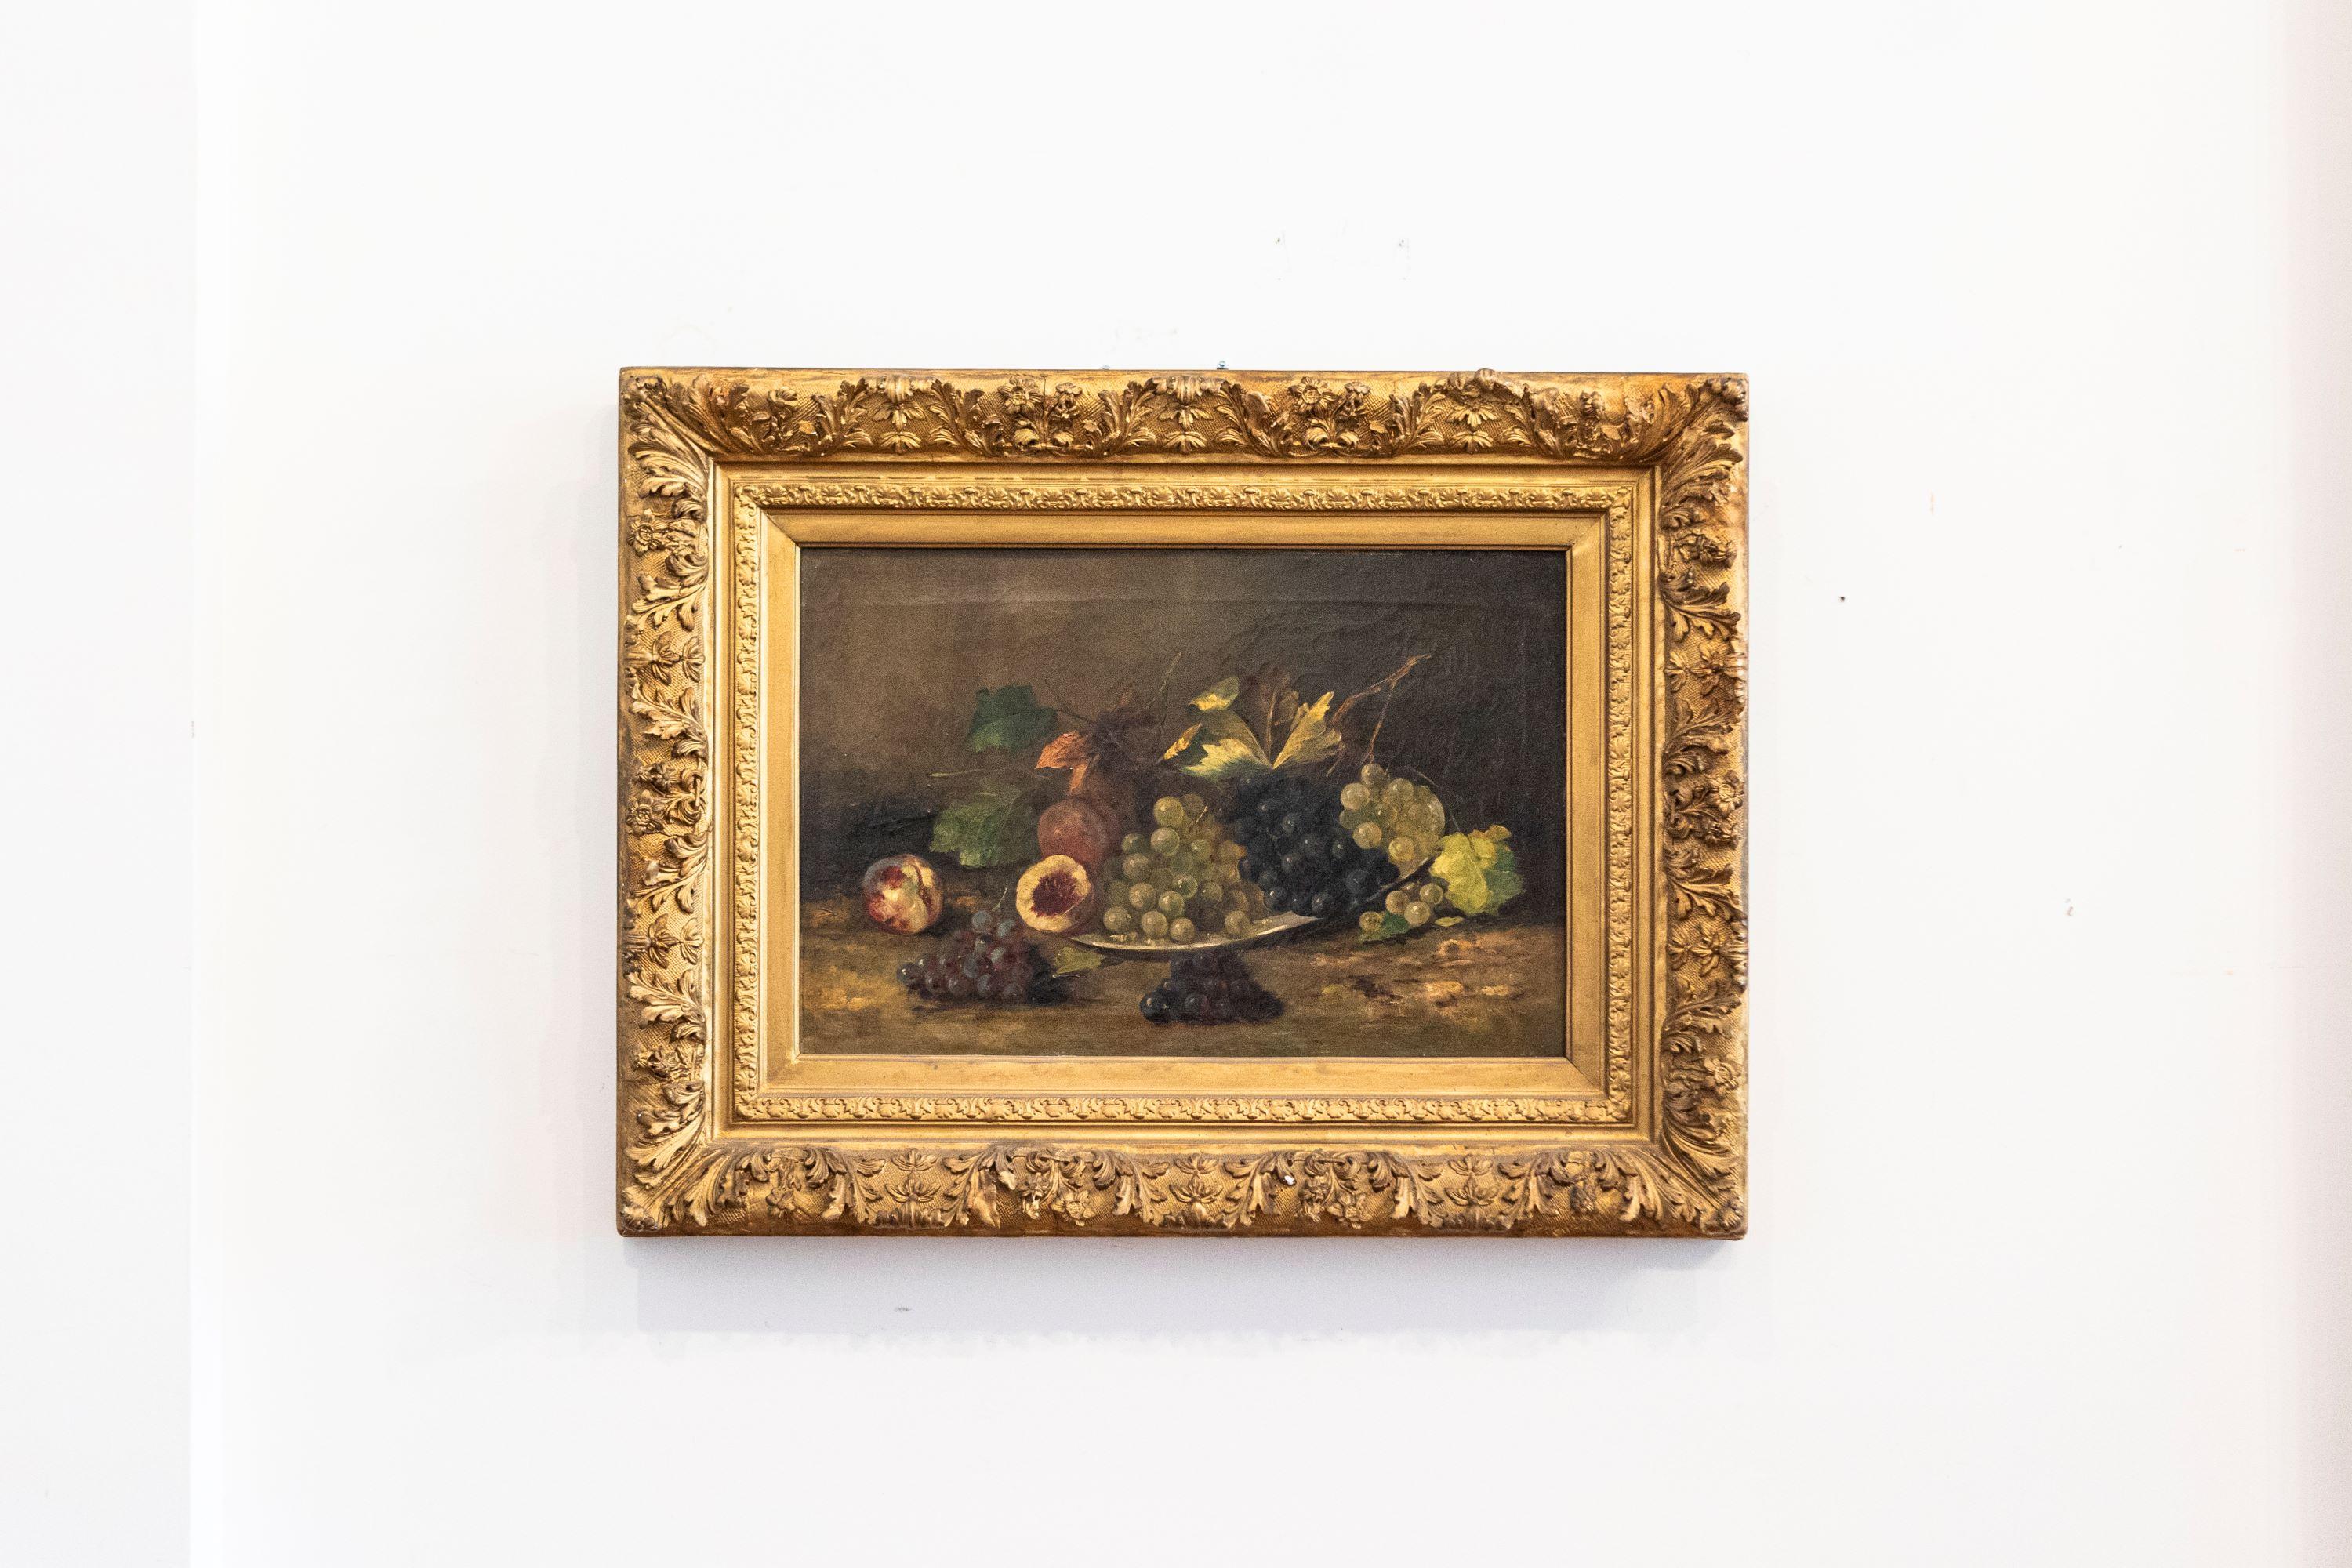 A French giltwood framed oil on canvas still-life painting from the 19th century depicting a bowl of fruits. Born in France during the 19th century, this horizontal oil on canvas still-life painting depicts a delicate arrangement of mouth-watering